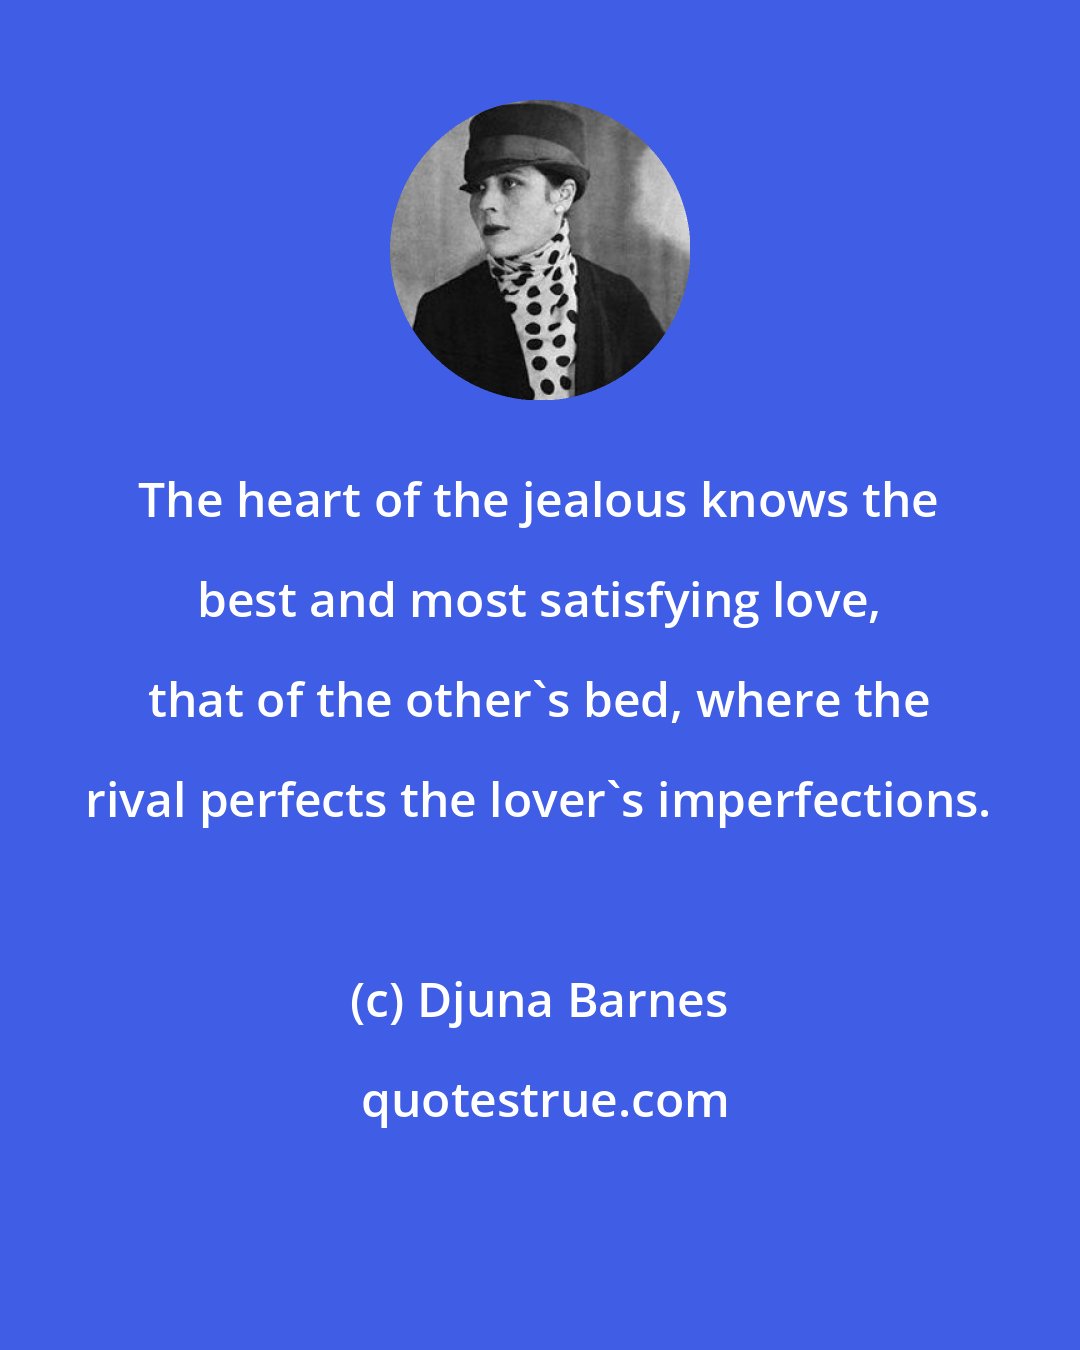 Djuna Barnes: The heart of the jealous knows the best and most satisfying love, that of the other's bed, where the rival perfects the lover's imperfections.